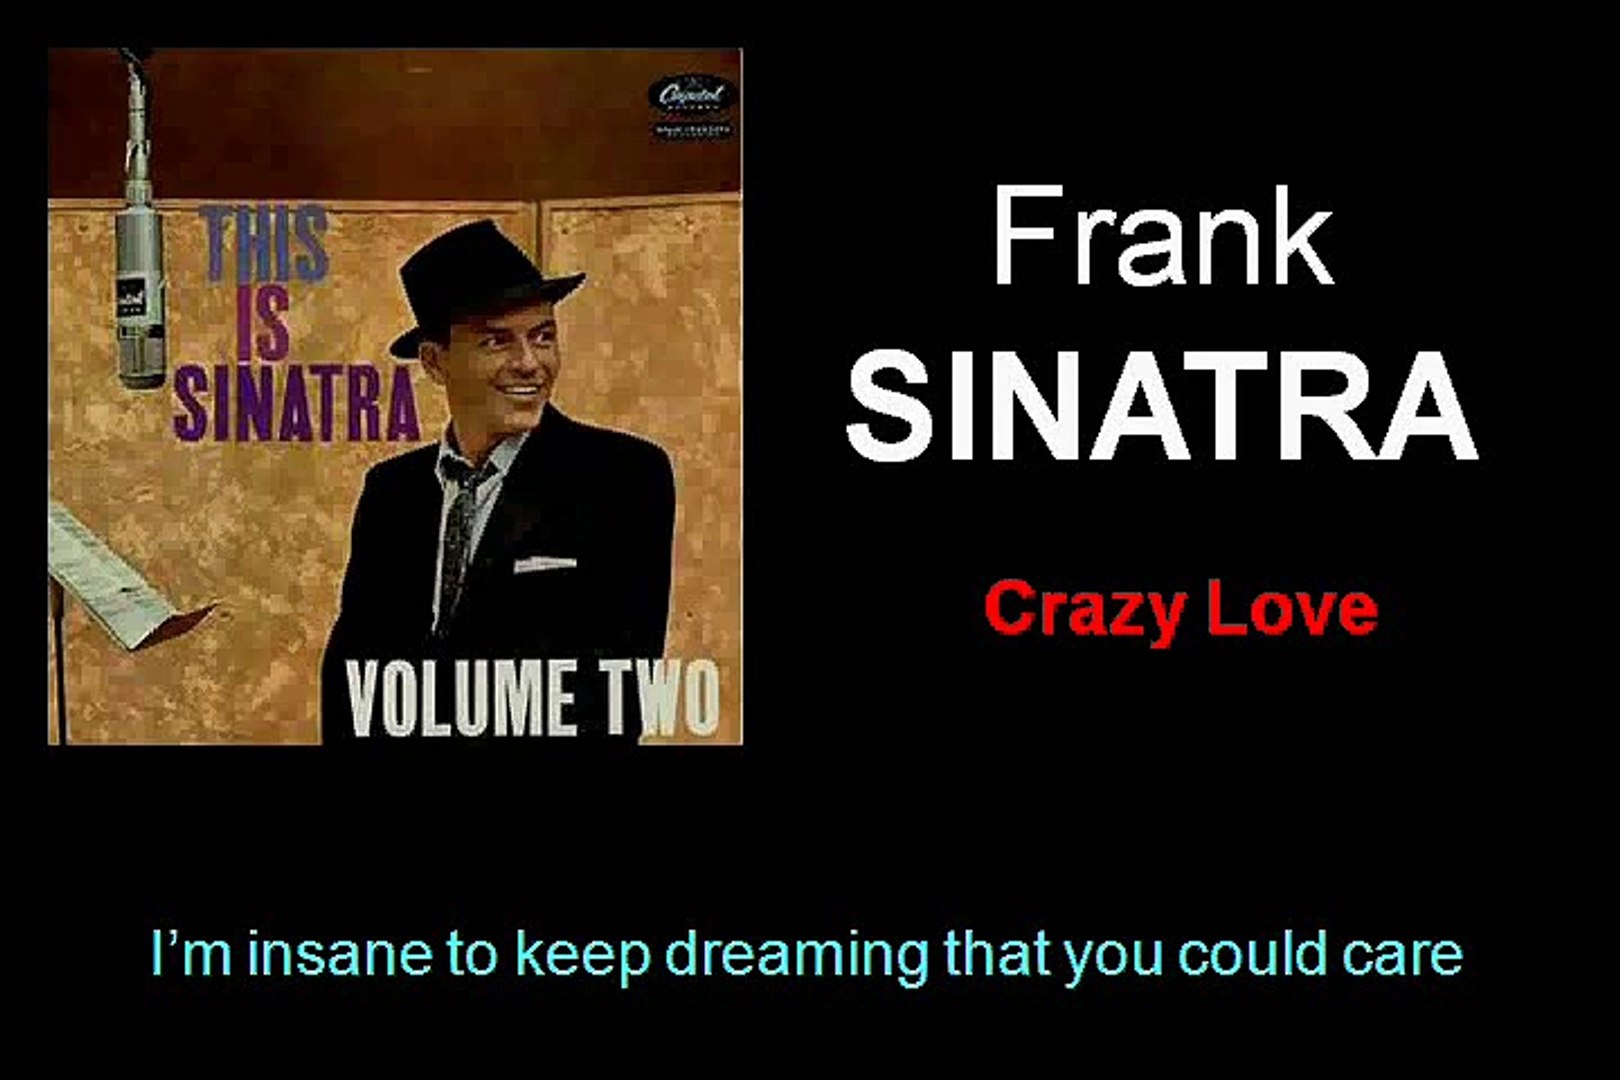 Фрэнк синатра love me. Frank Sinatra - Hey! Jealous lover. Frank Sinatra - put your Dreams away. It might as well be Swing Фрэнк Синатра. Hey Hey Hey lover текст.